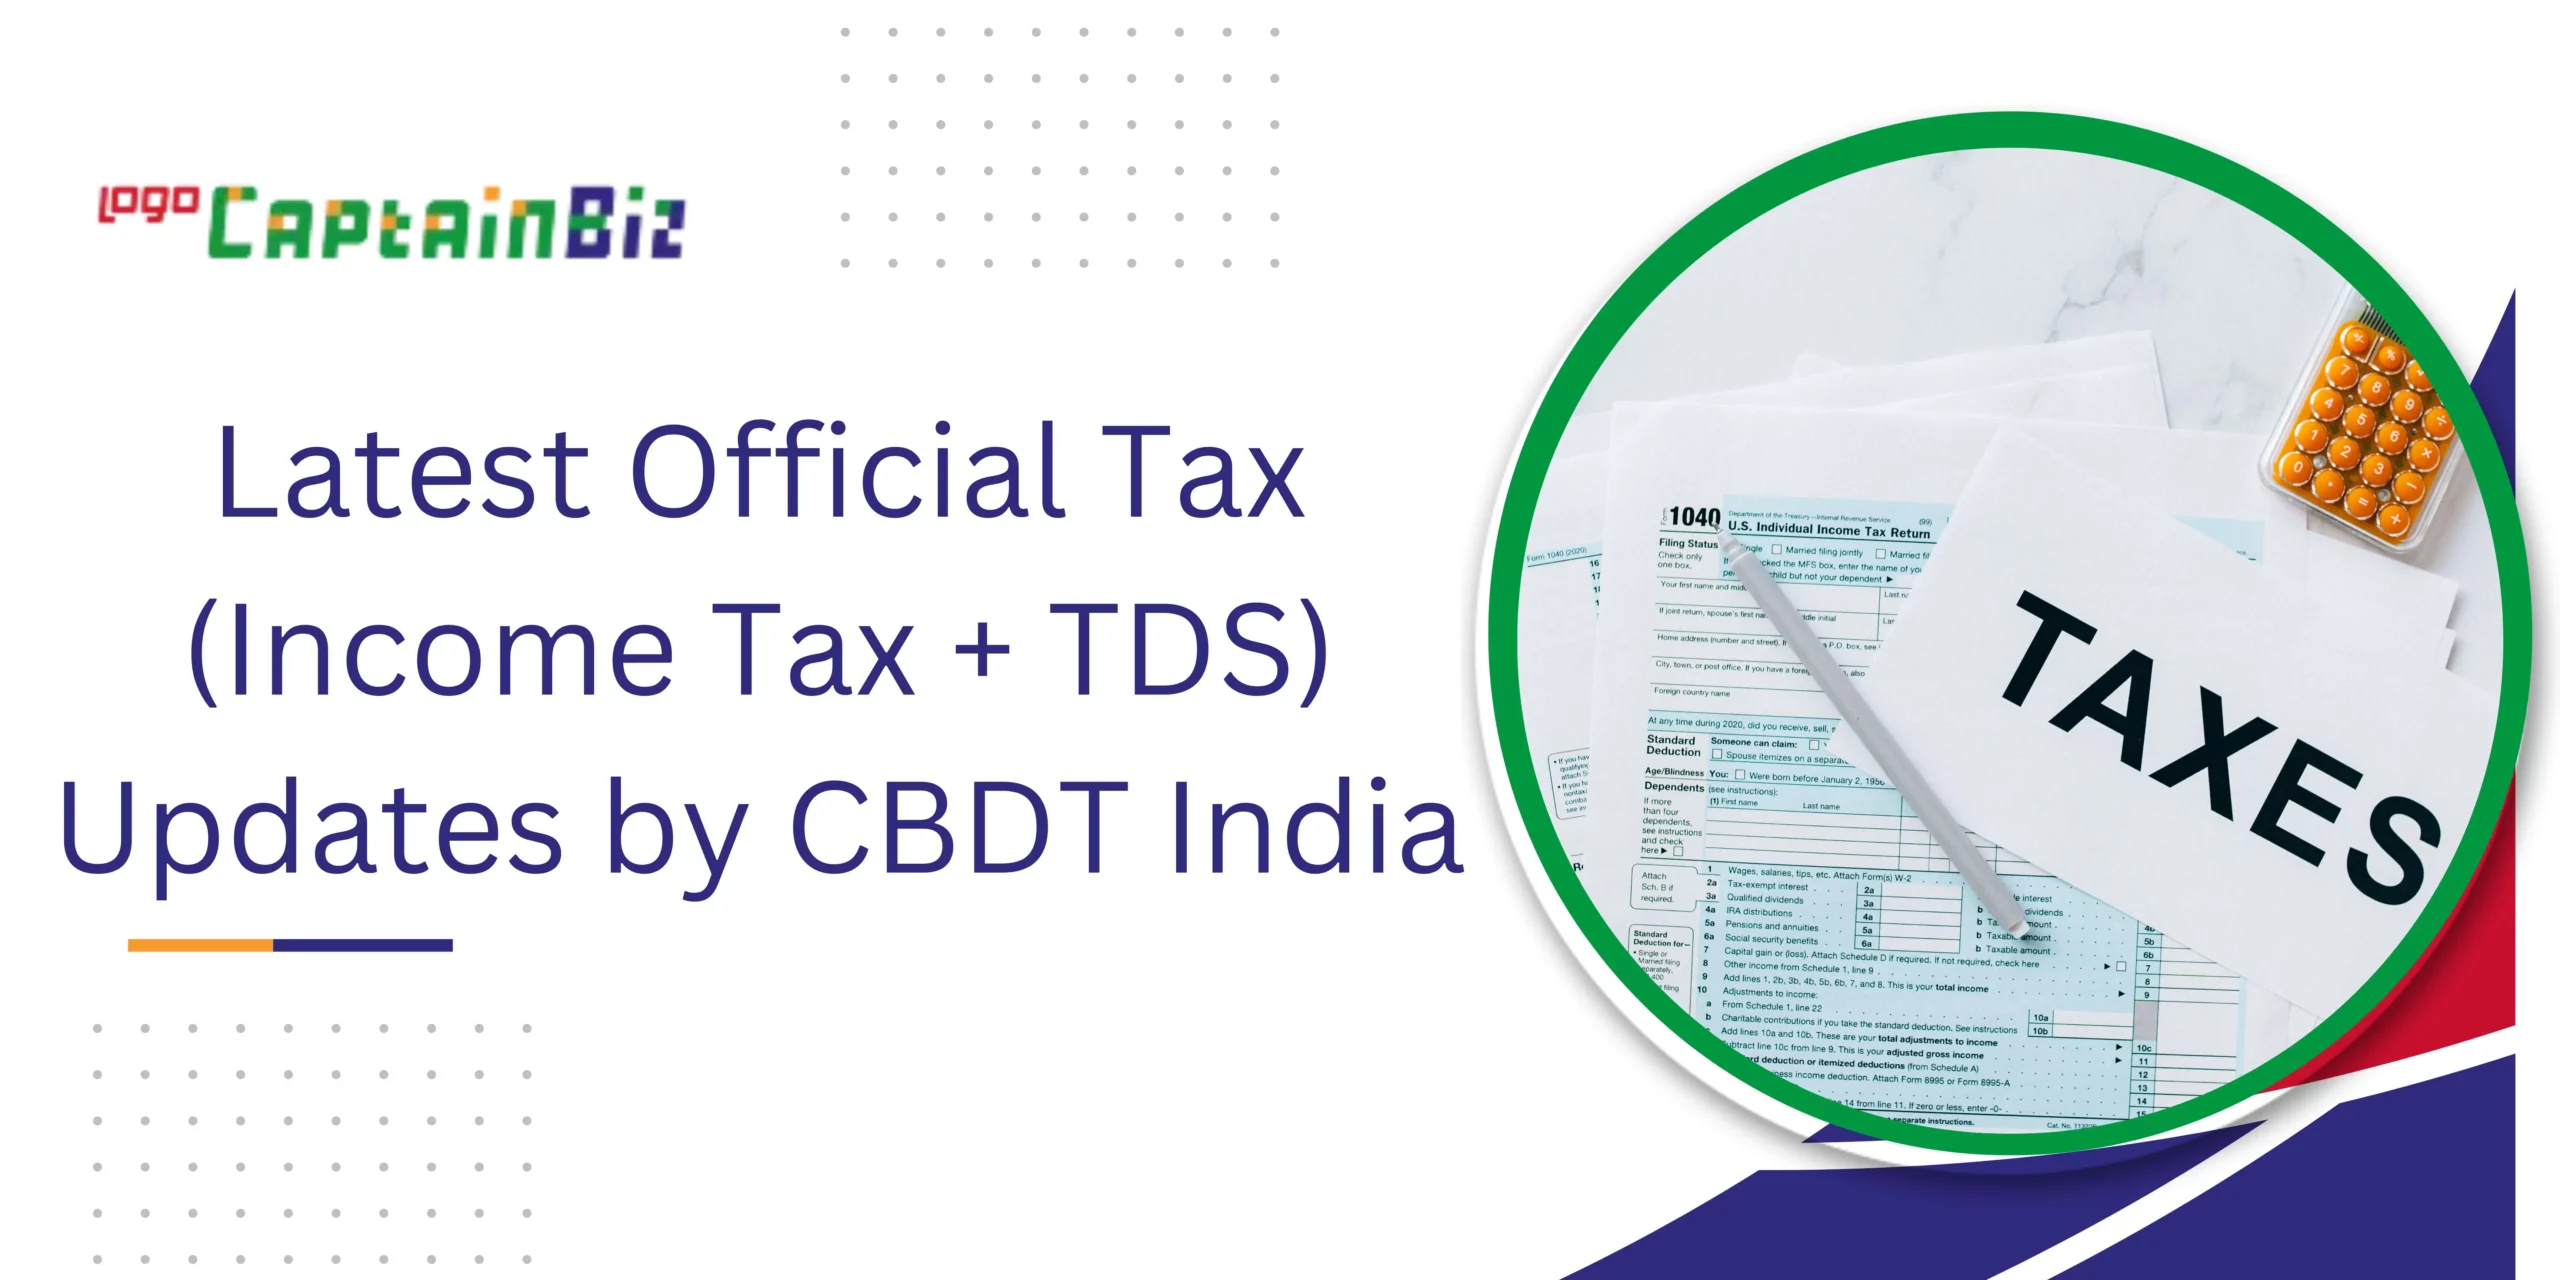 CaptainBiz: Latest Official Tax Income Tax + TDS Updates by CBDT India